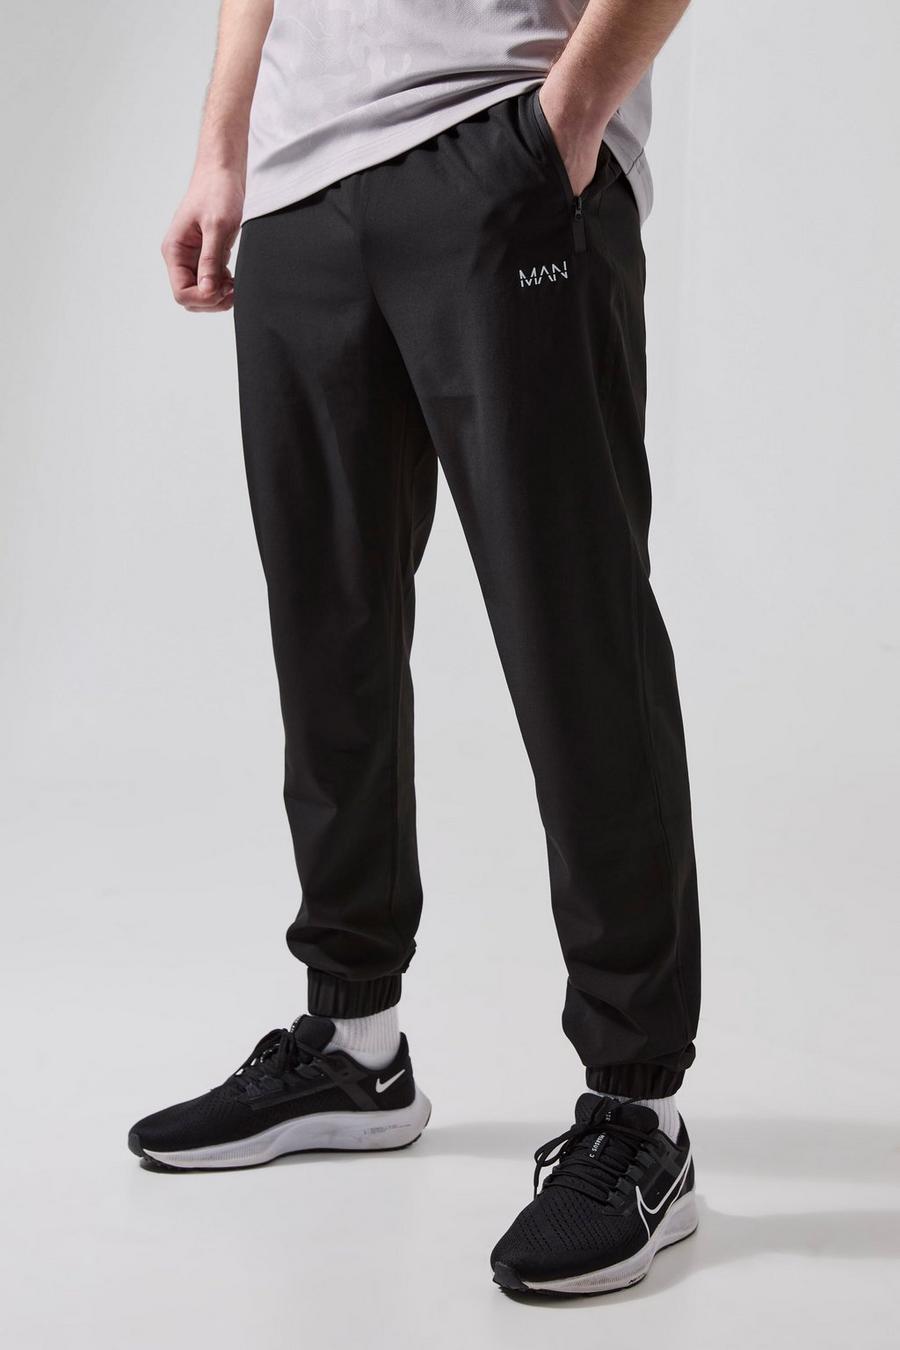 Black Tall Man Active Gym Tapered Jogger